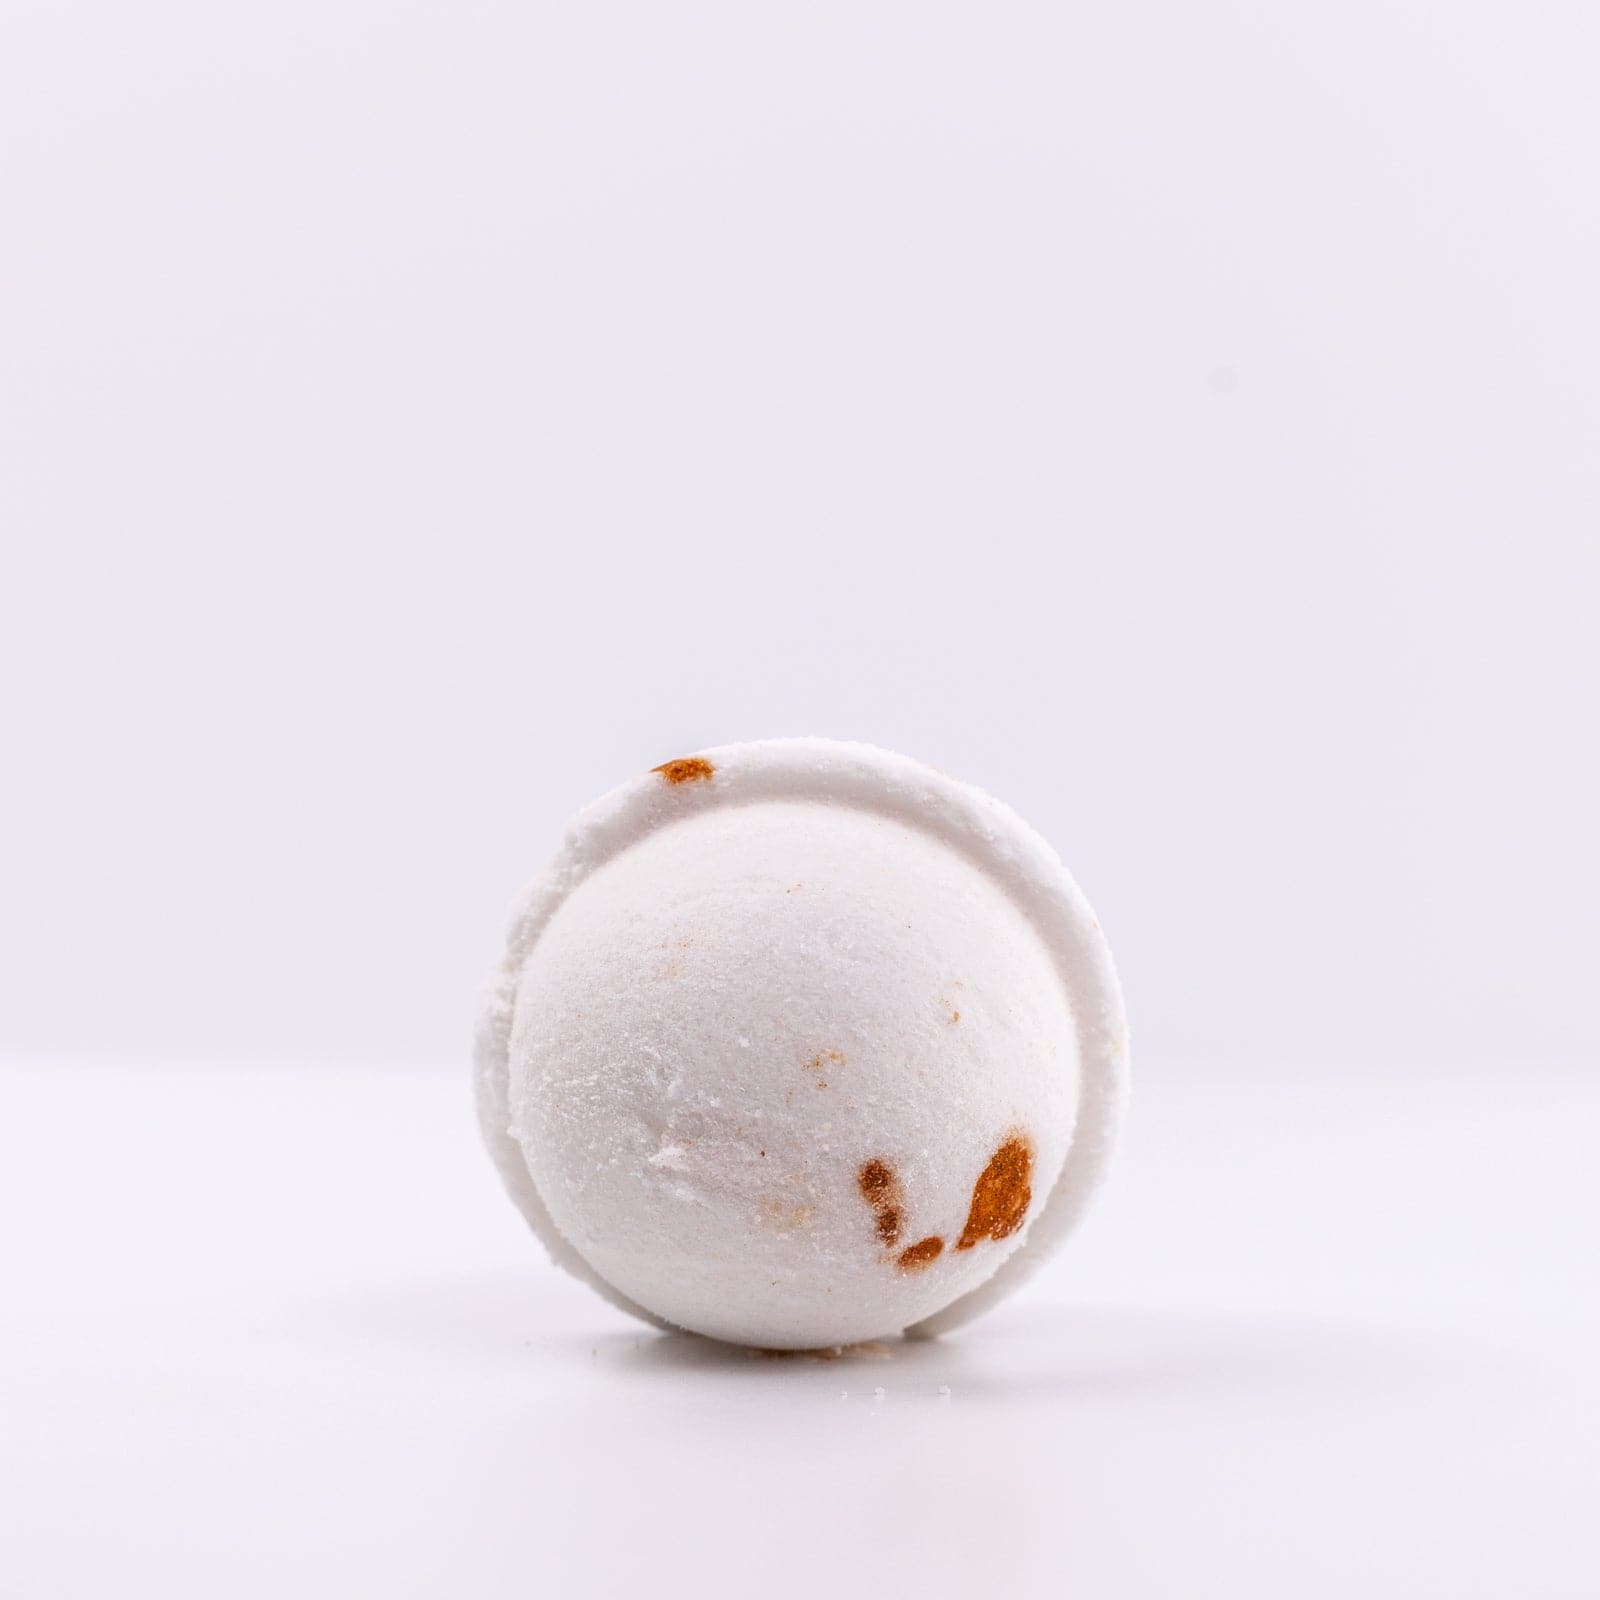 view of the bottom of a white, Narcissist Bath Bomb with dark orange spot